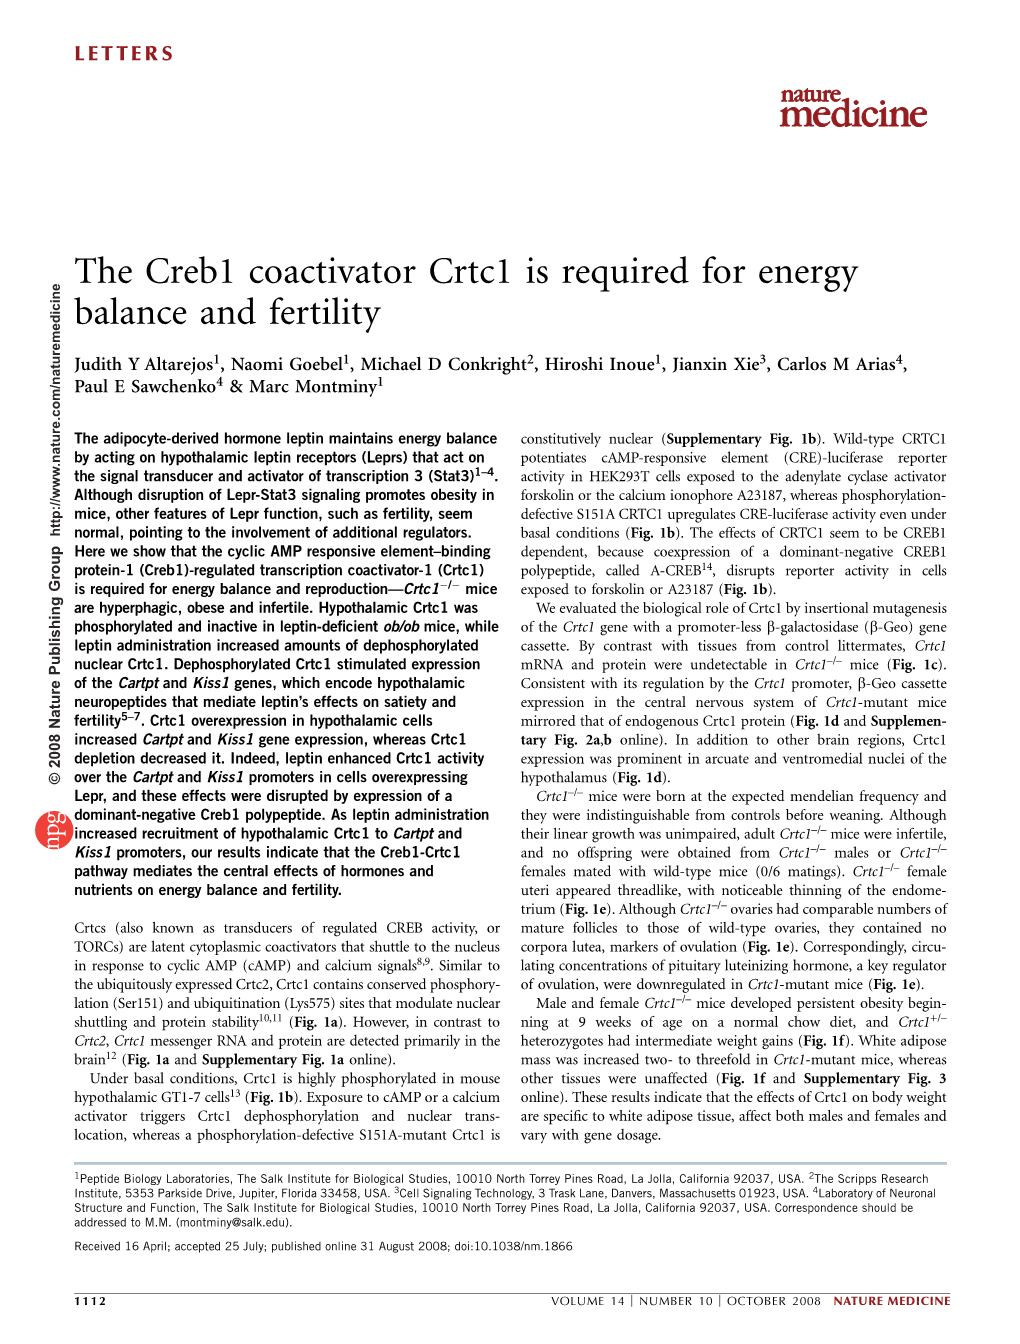 The Creb1 Coactivator Crtc1 Is Required for Energy Balance and Fertility